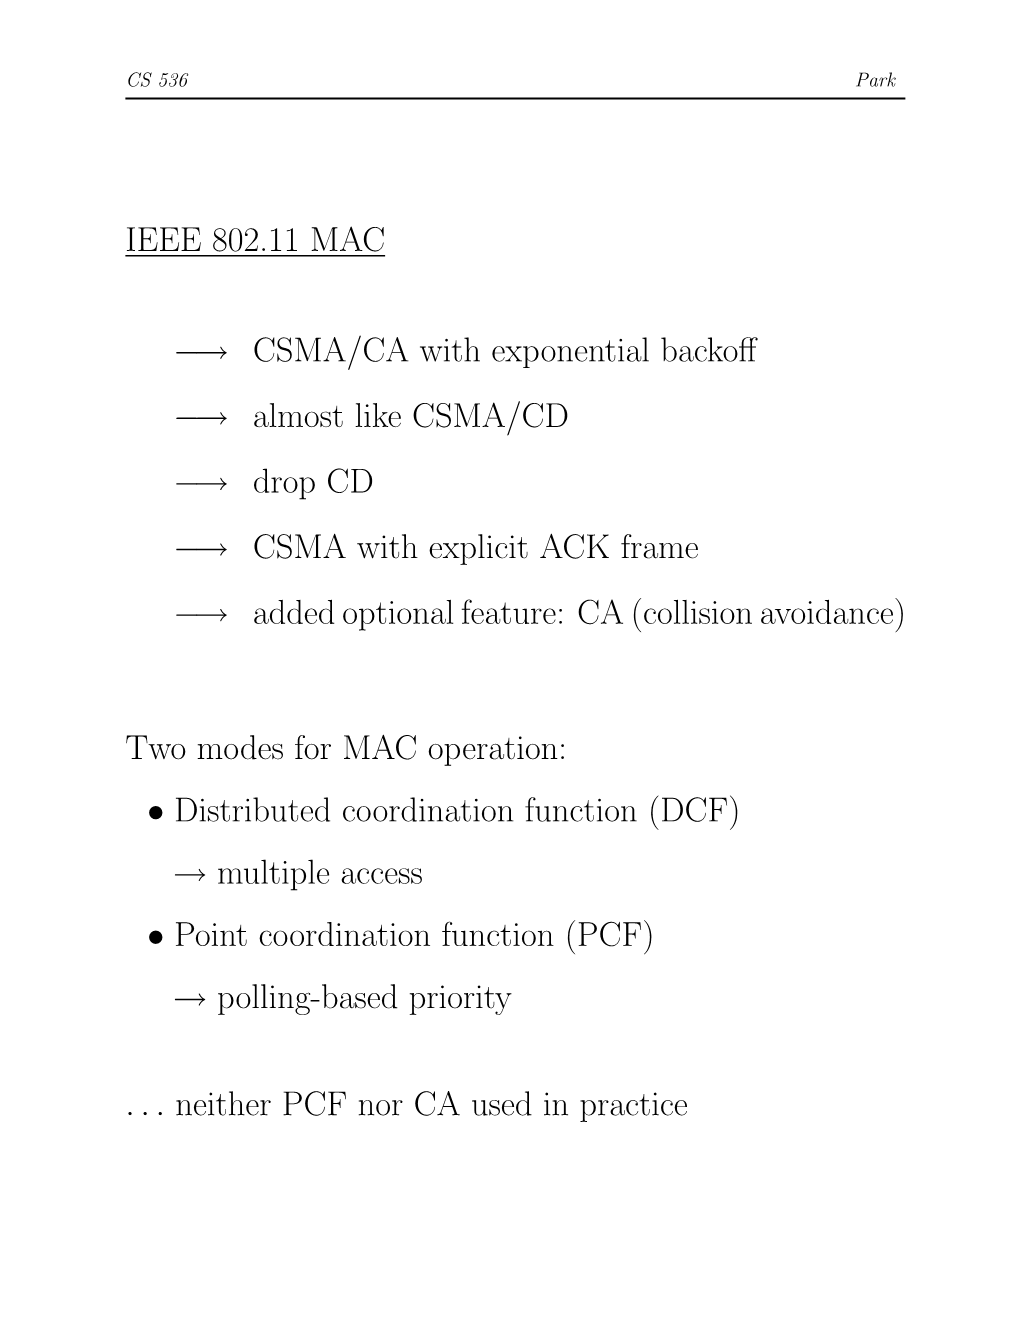 IEEE 802.11 MAC −→ CSMA/CA with Exponential Backoff −→ Almost